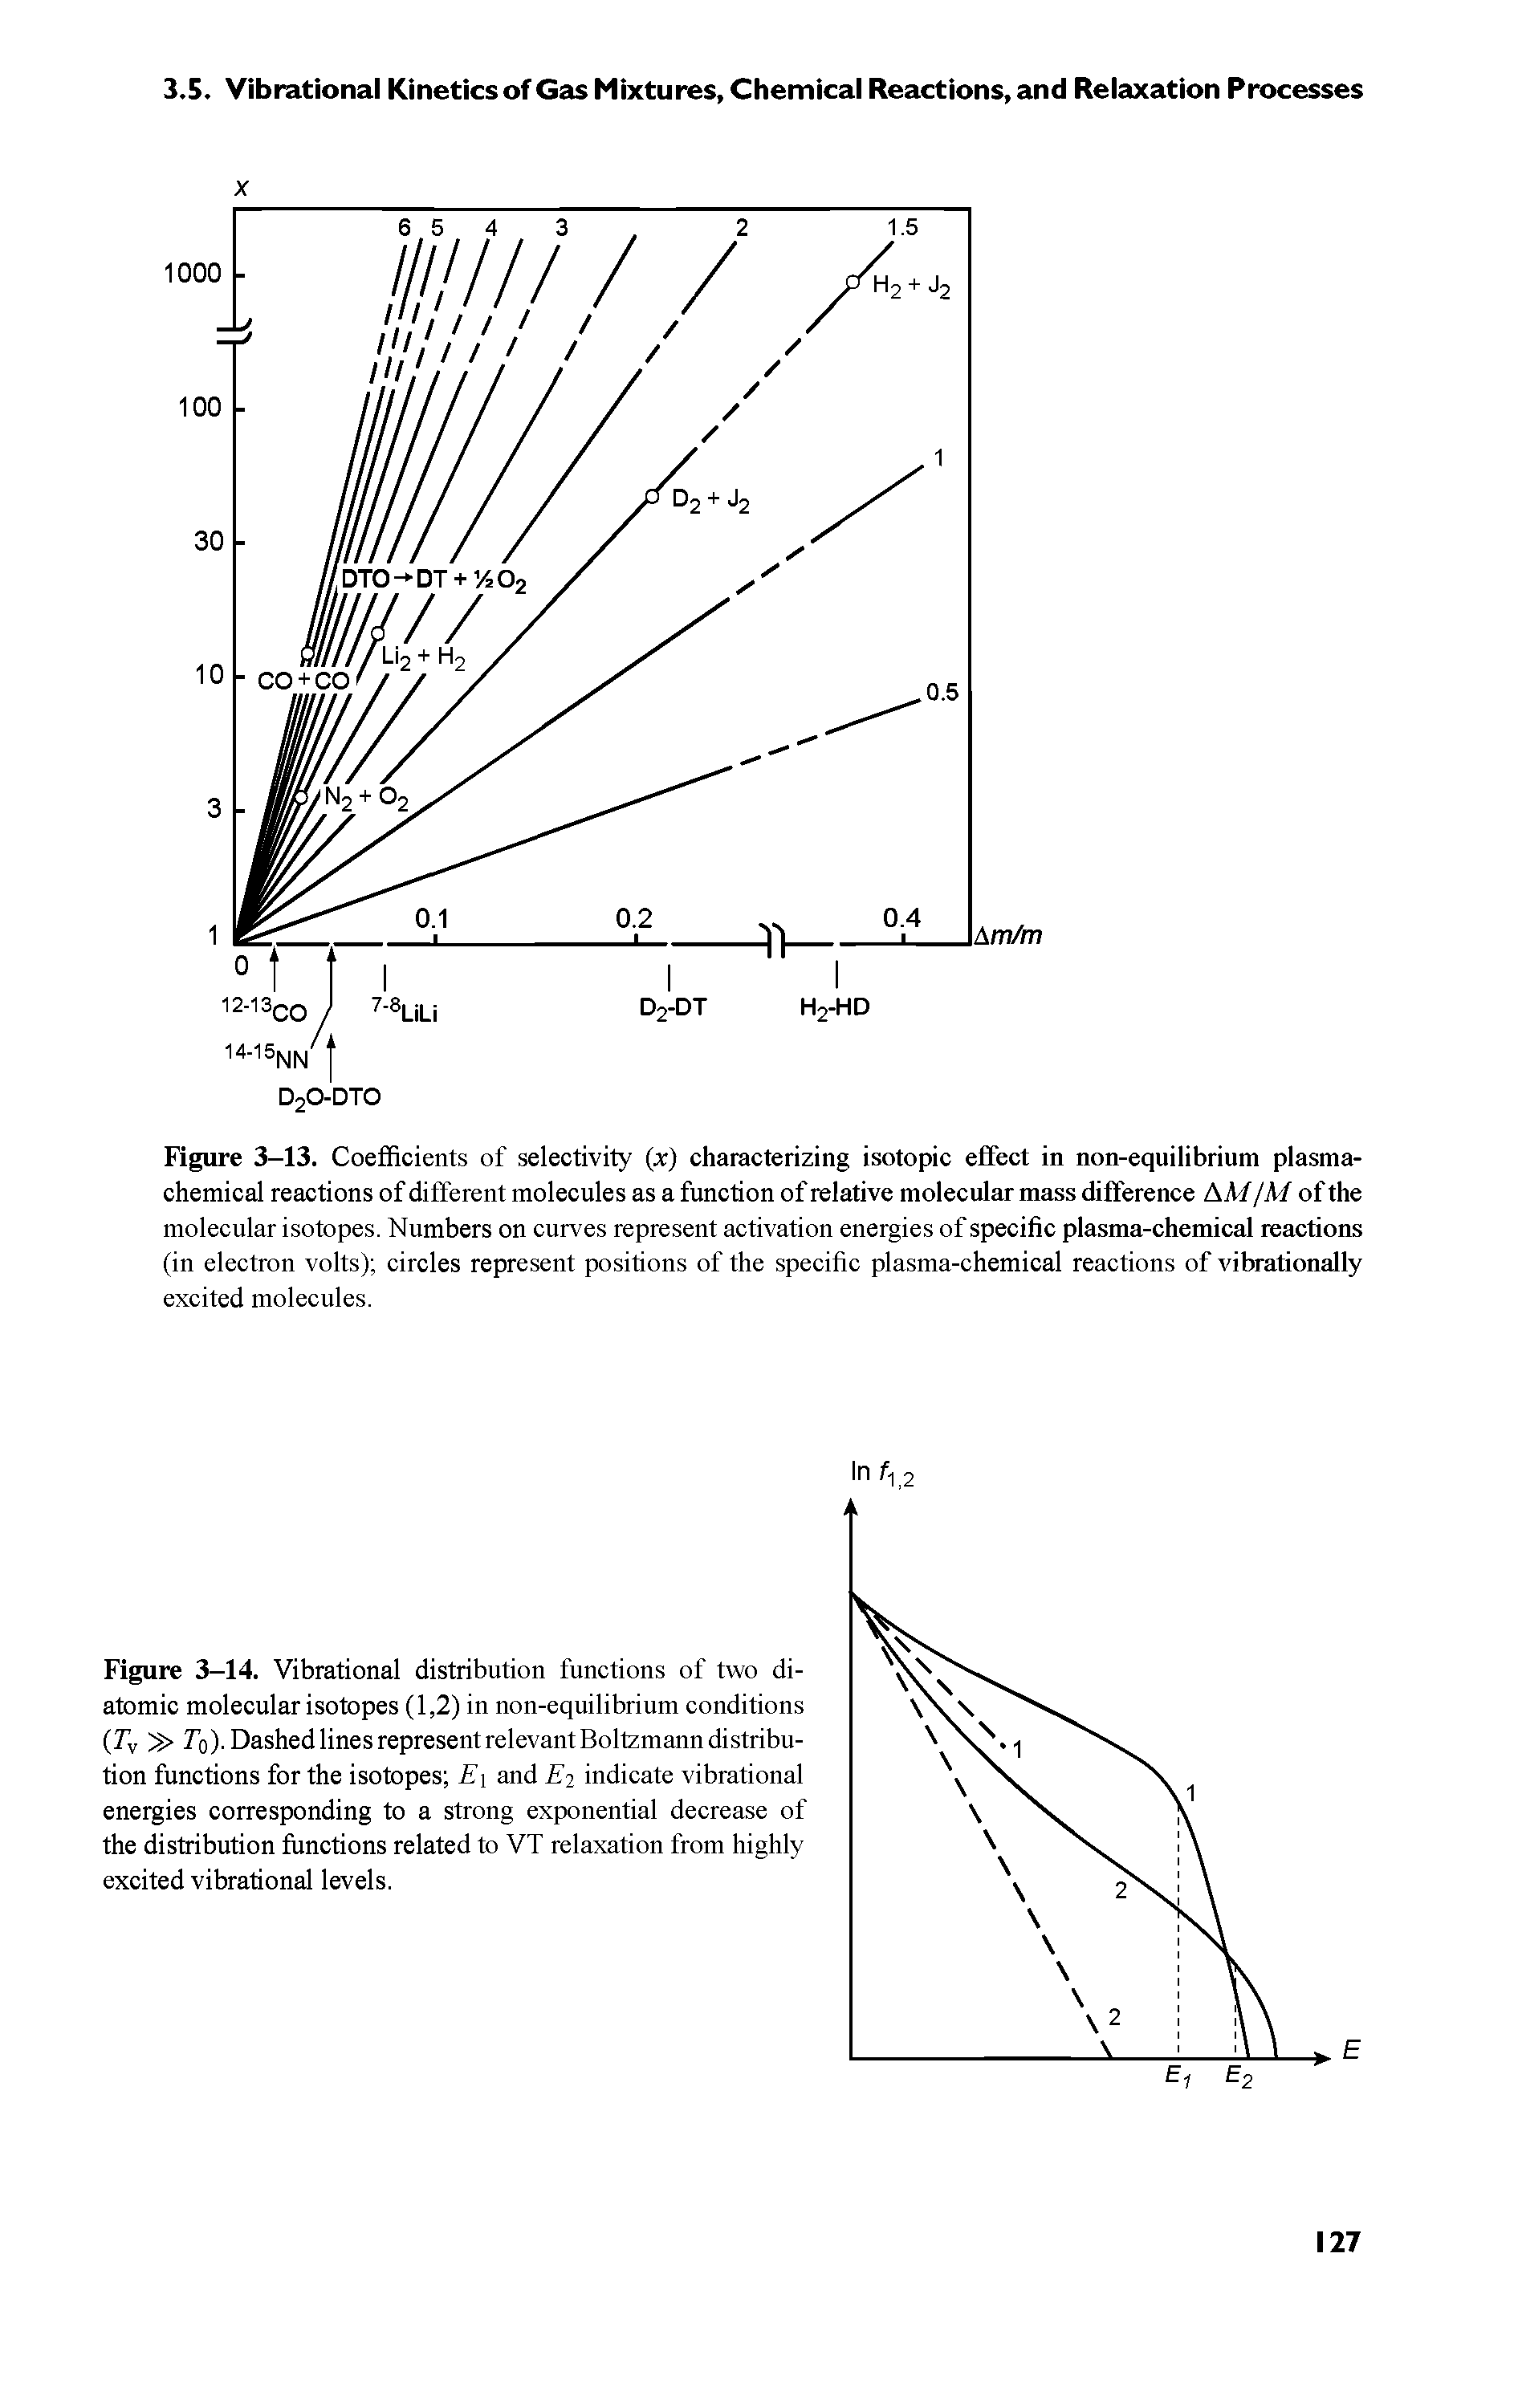 Figure 3-13. Coefficients of selectivity (x) characterizing isotopic effect in non-equilibrium plasma-chemical reactions of different molecules as a function of relative molecular mass difference AA//A/ of the molecular isotopes. Numbers on curves represent activation energies of specific plasma-chemical reactions (in electron volts) circles represent positions of the specific plasma-chemical reactions of vibrationally excited molecules.